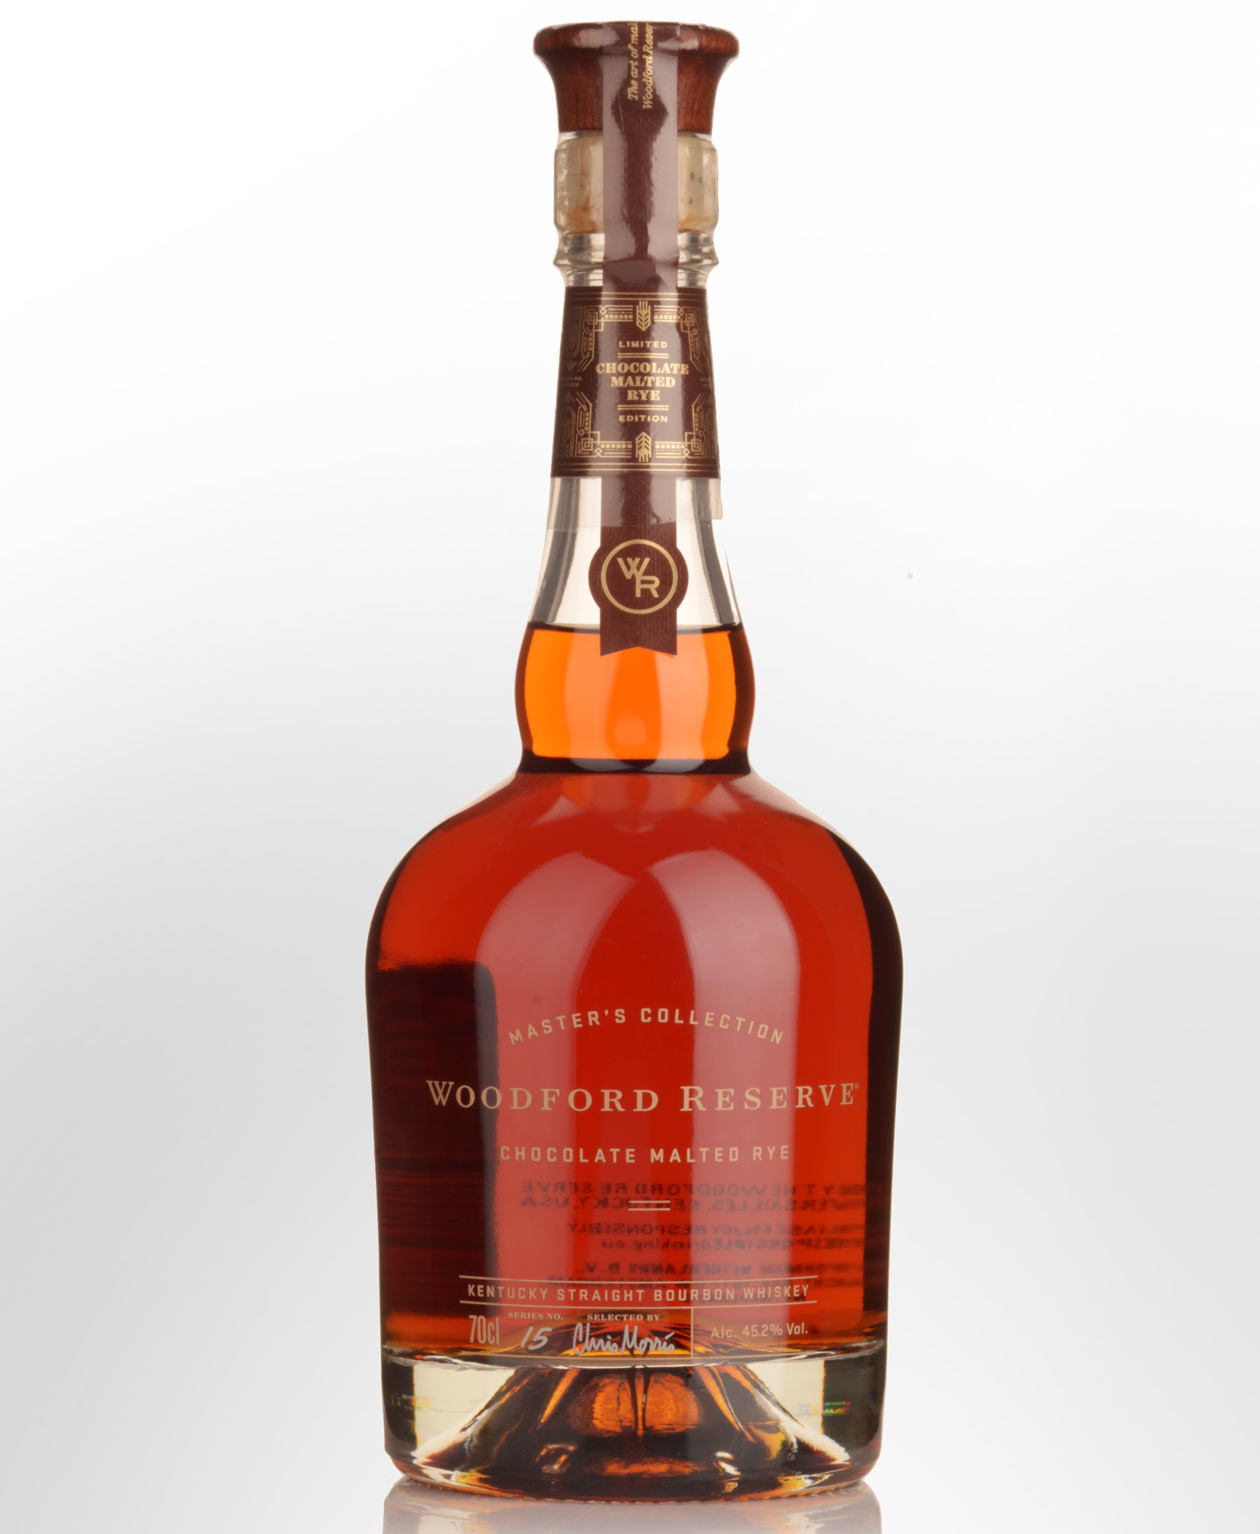 Woodford Reserve Master's Chocolate Malted Rye